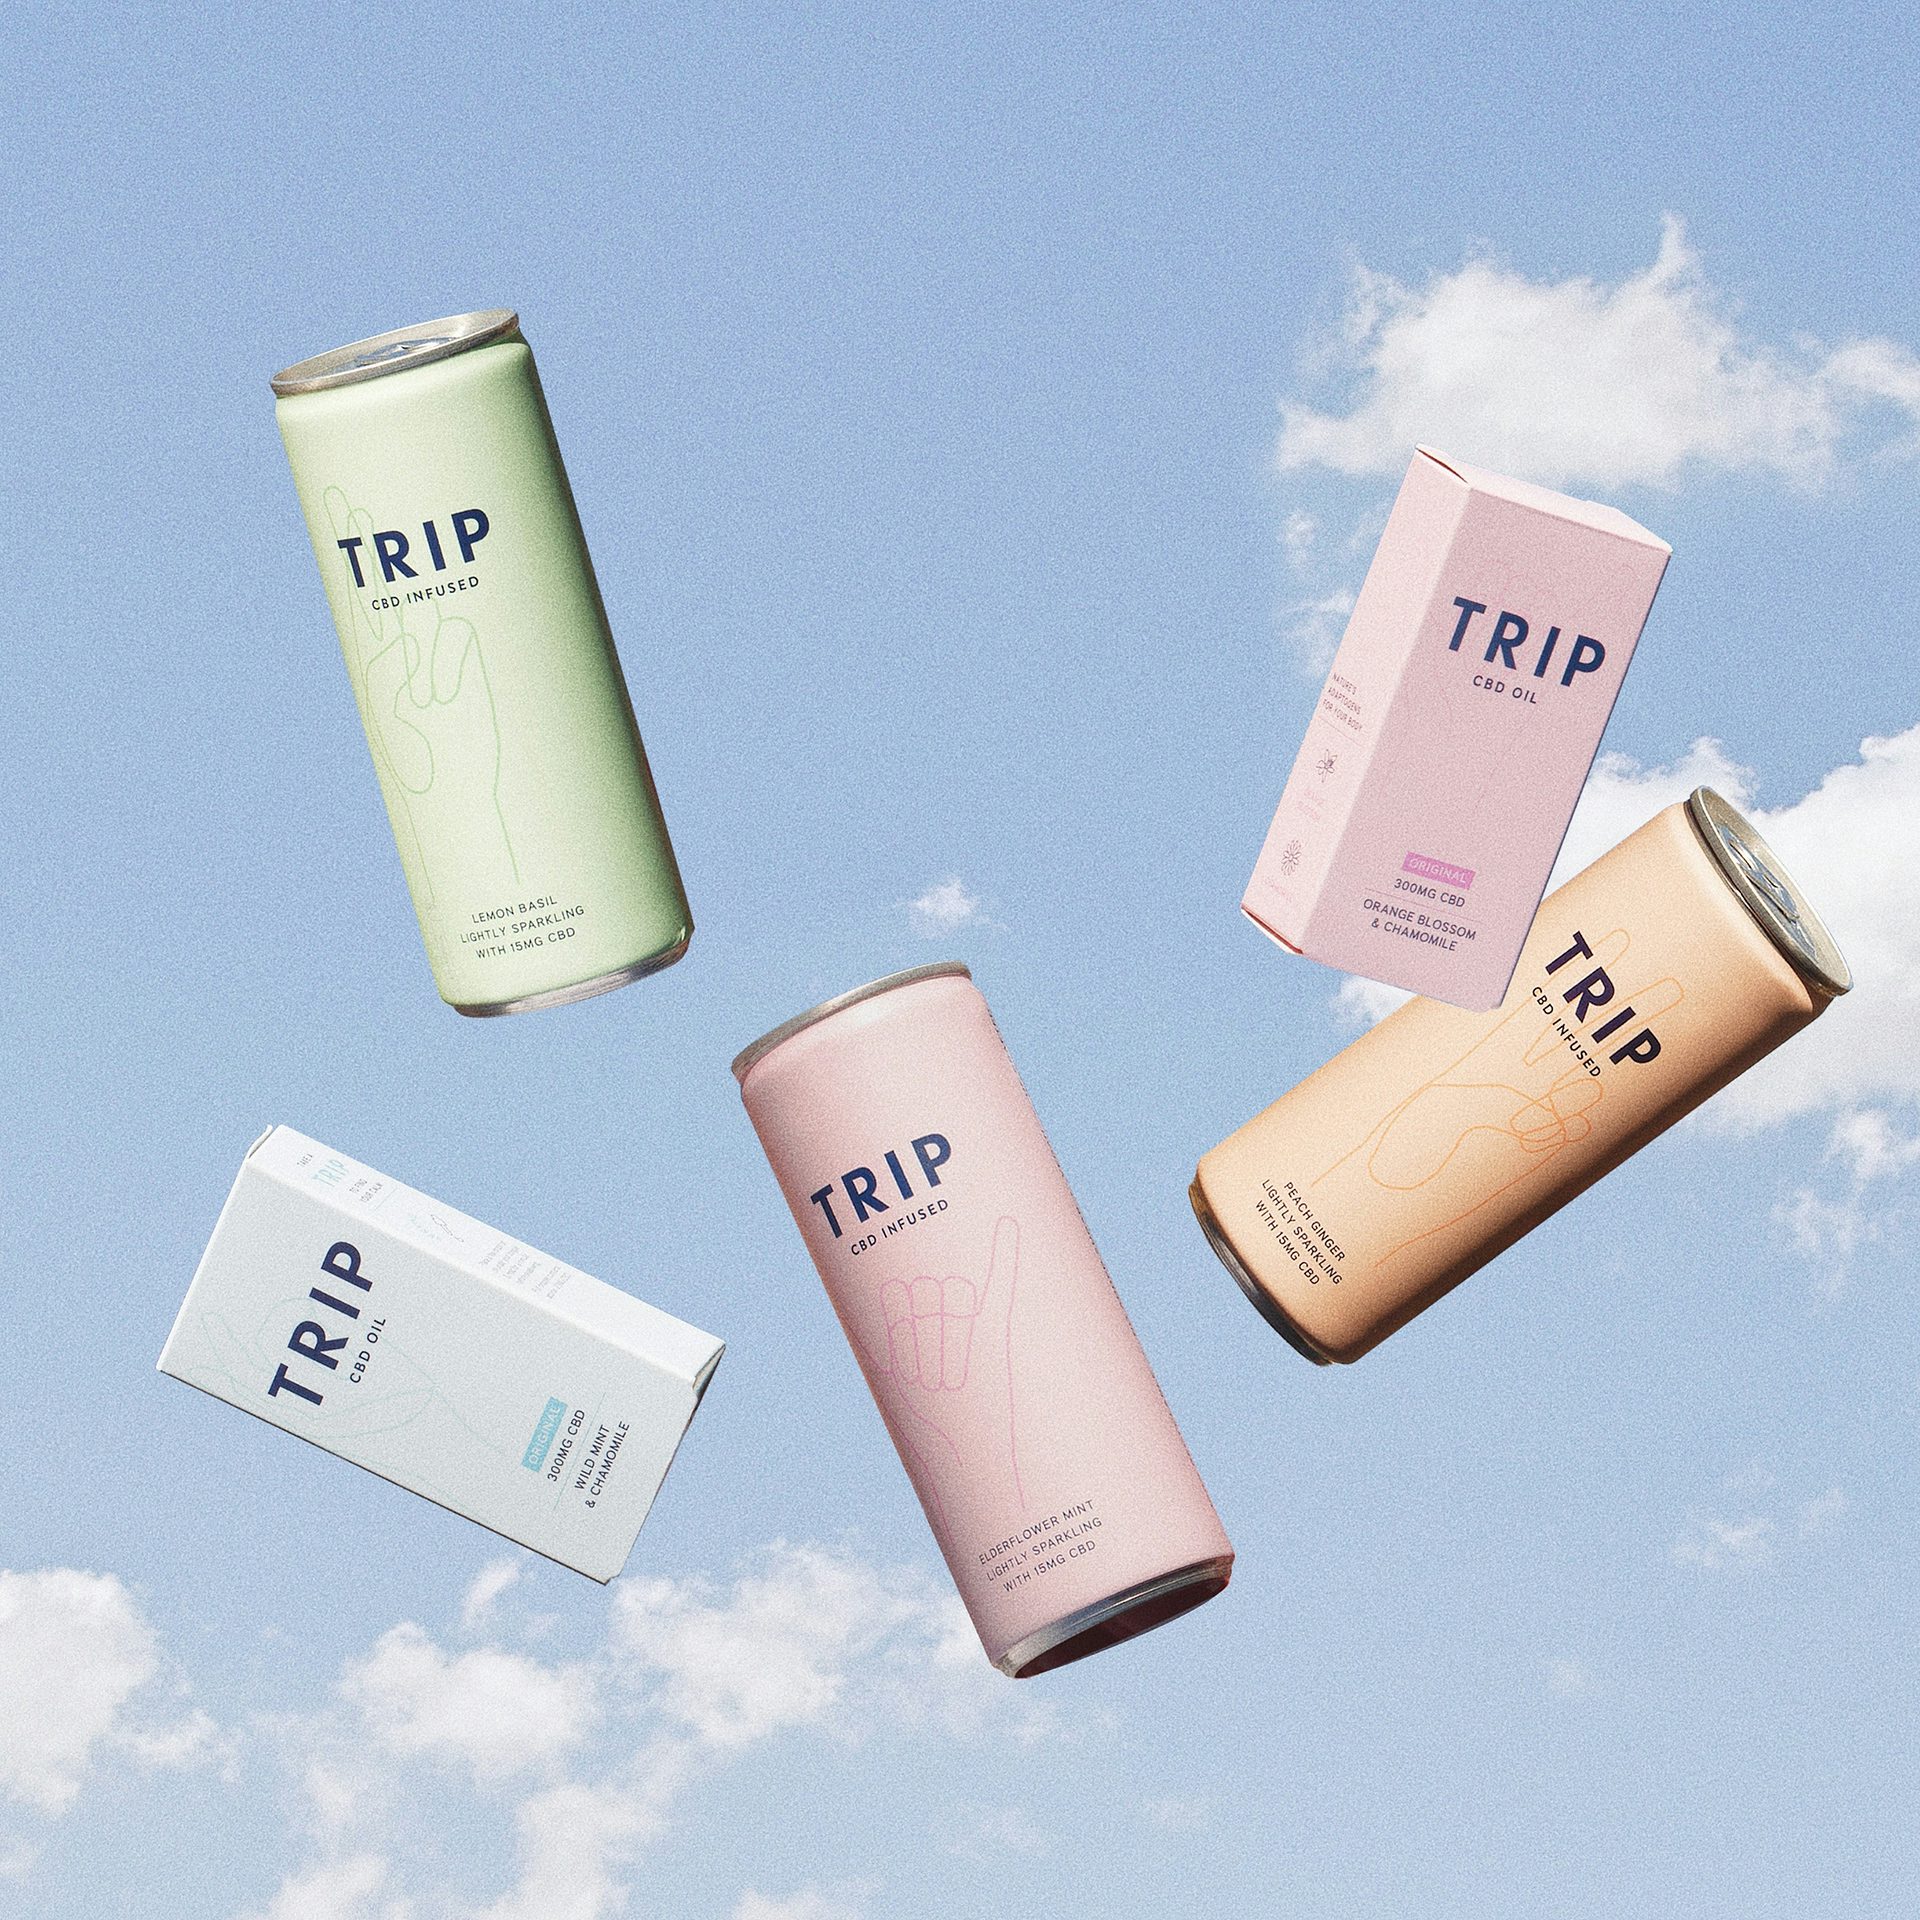 Trip CBD drinks cans and oils floating against clouds